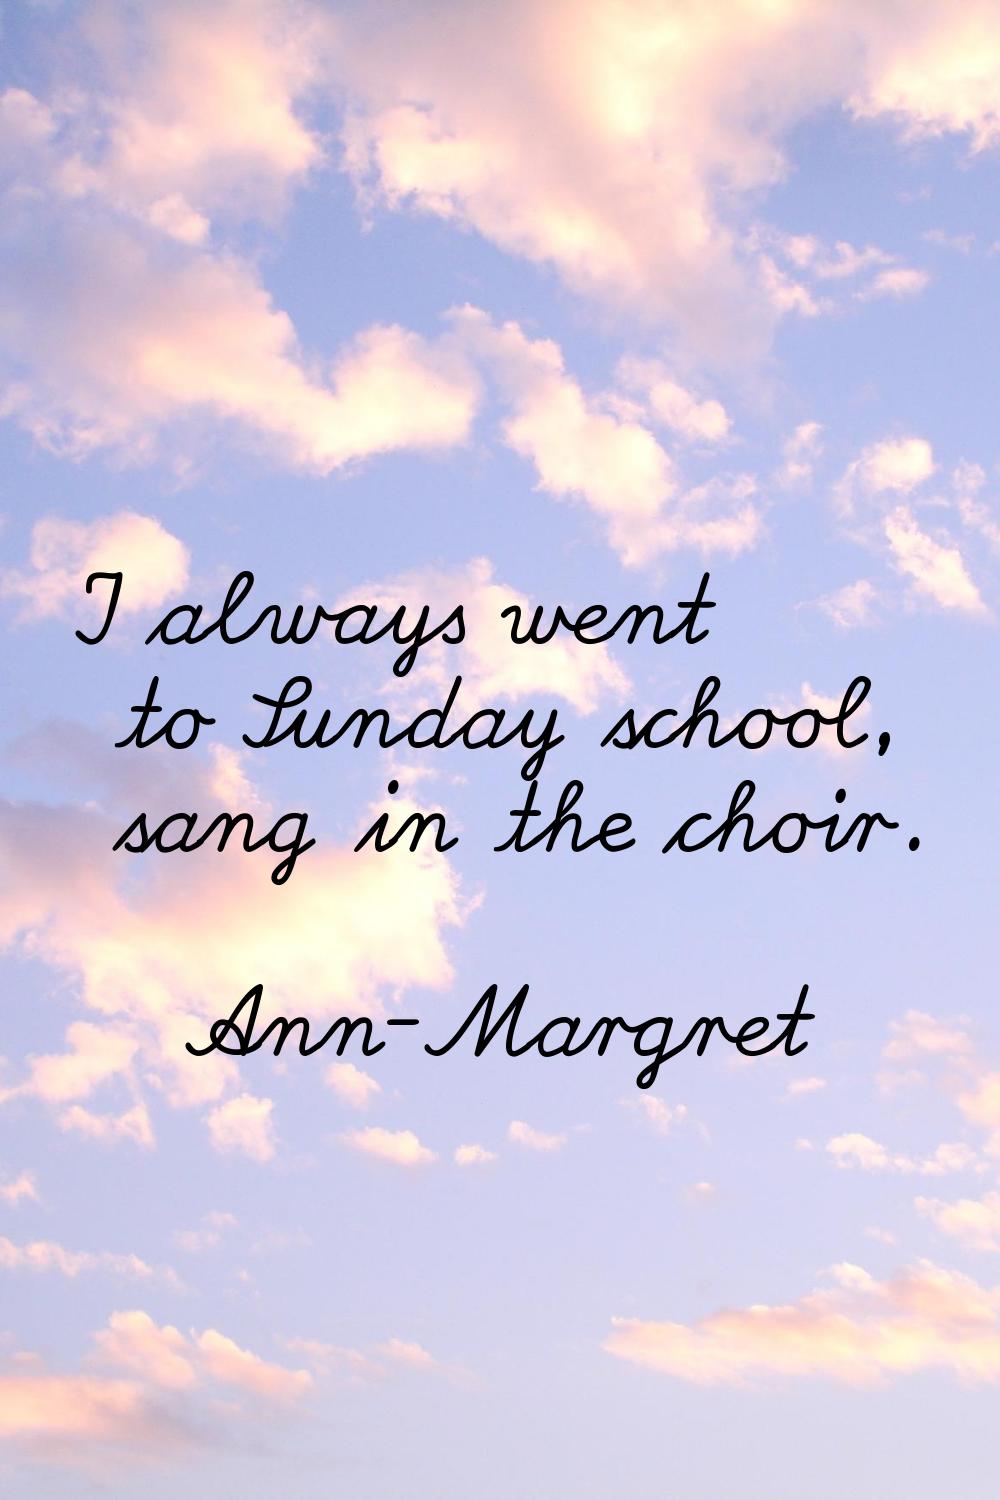 I always went to Sunday school, sang in the choir.